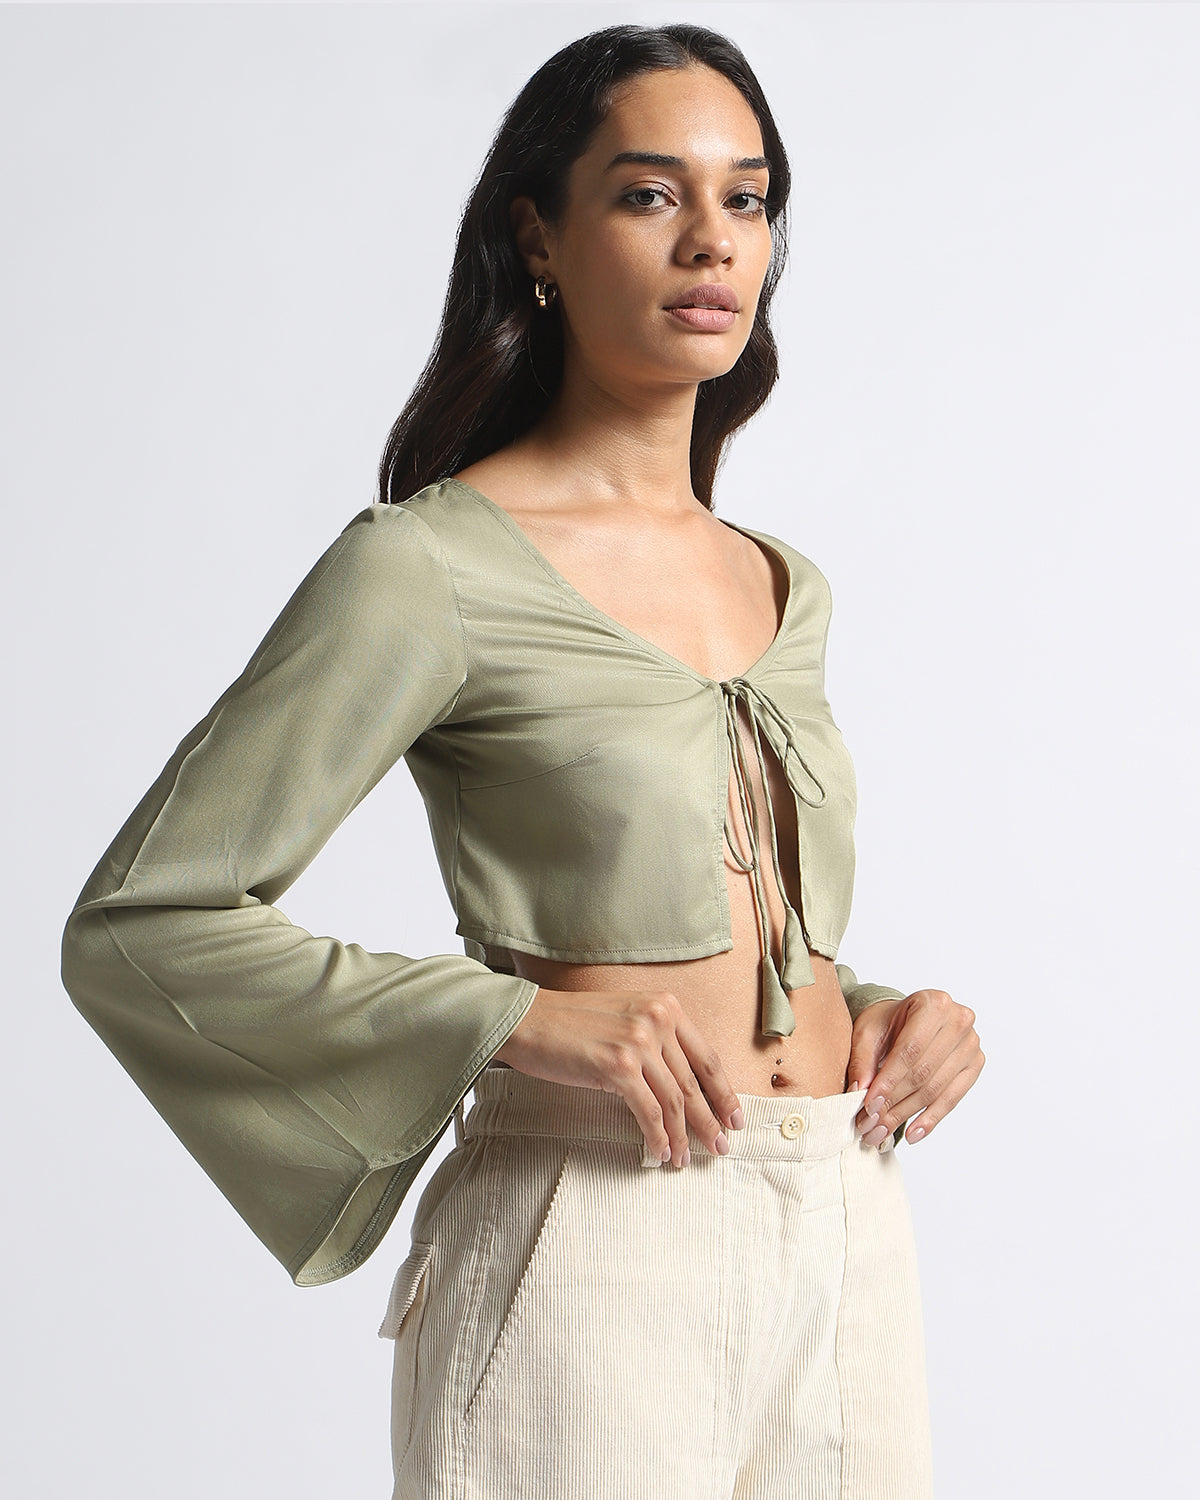 Conscious Bell Sleeves Tie-Up Top - Light Olive Green